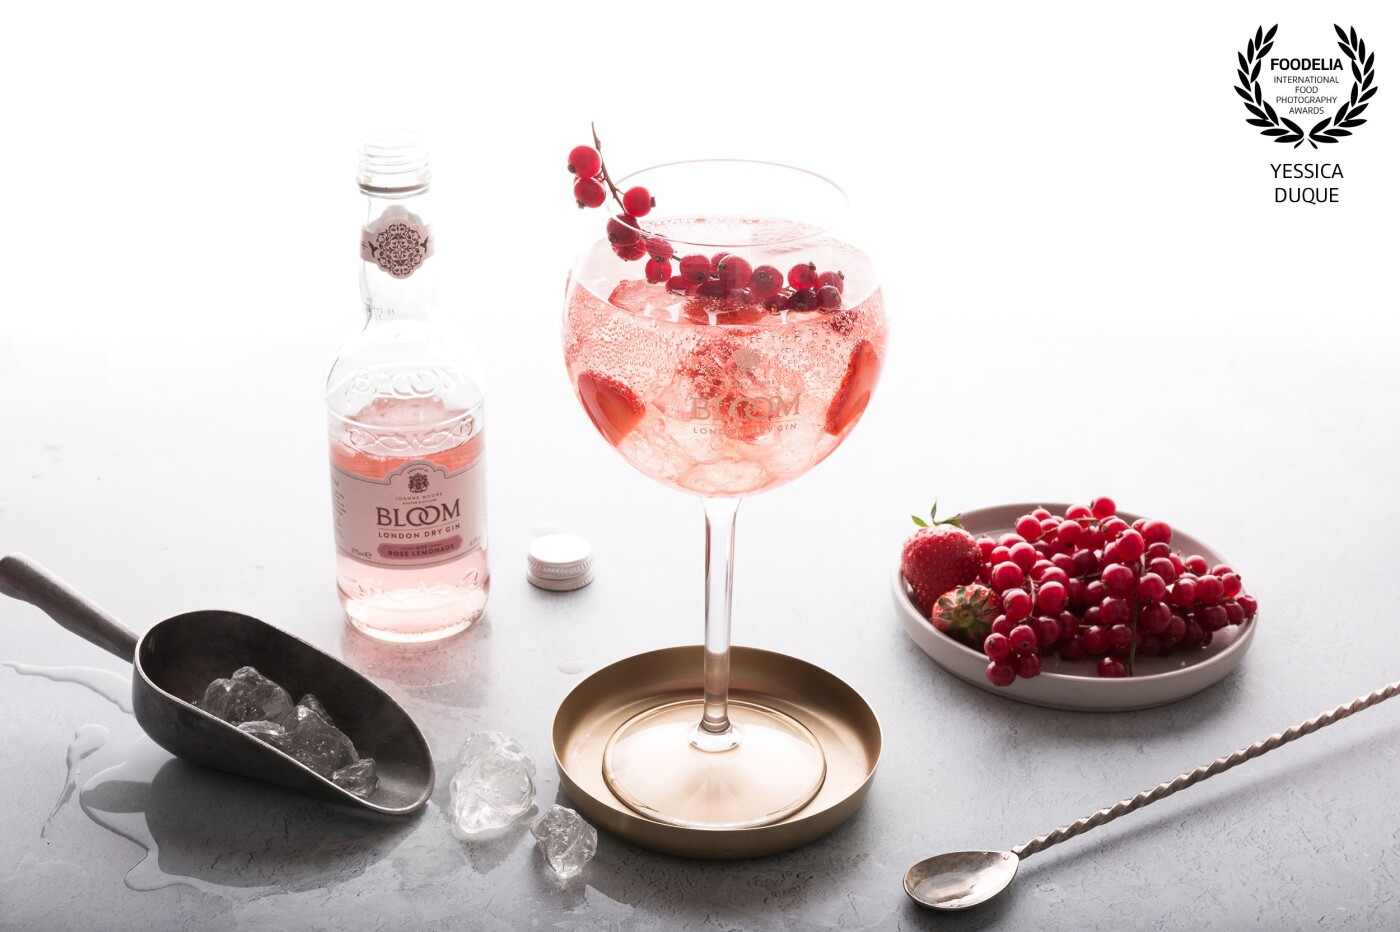 The backlight is a serious deal.<br />
I helped my self with a model light with a snoot and I finally got a shot that made me happy.  A delicious rosewater gin tonic garnished with strawberries and red berries, this made my day a happy day.